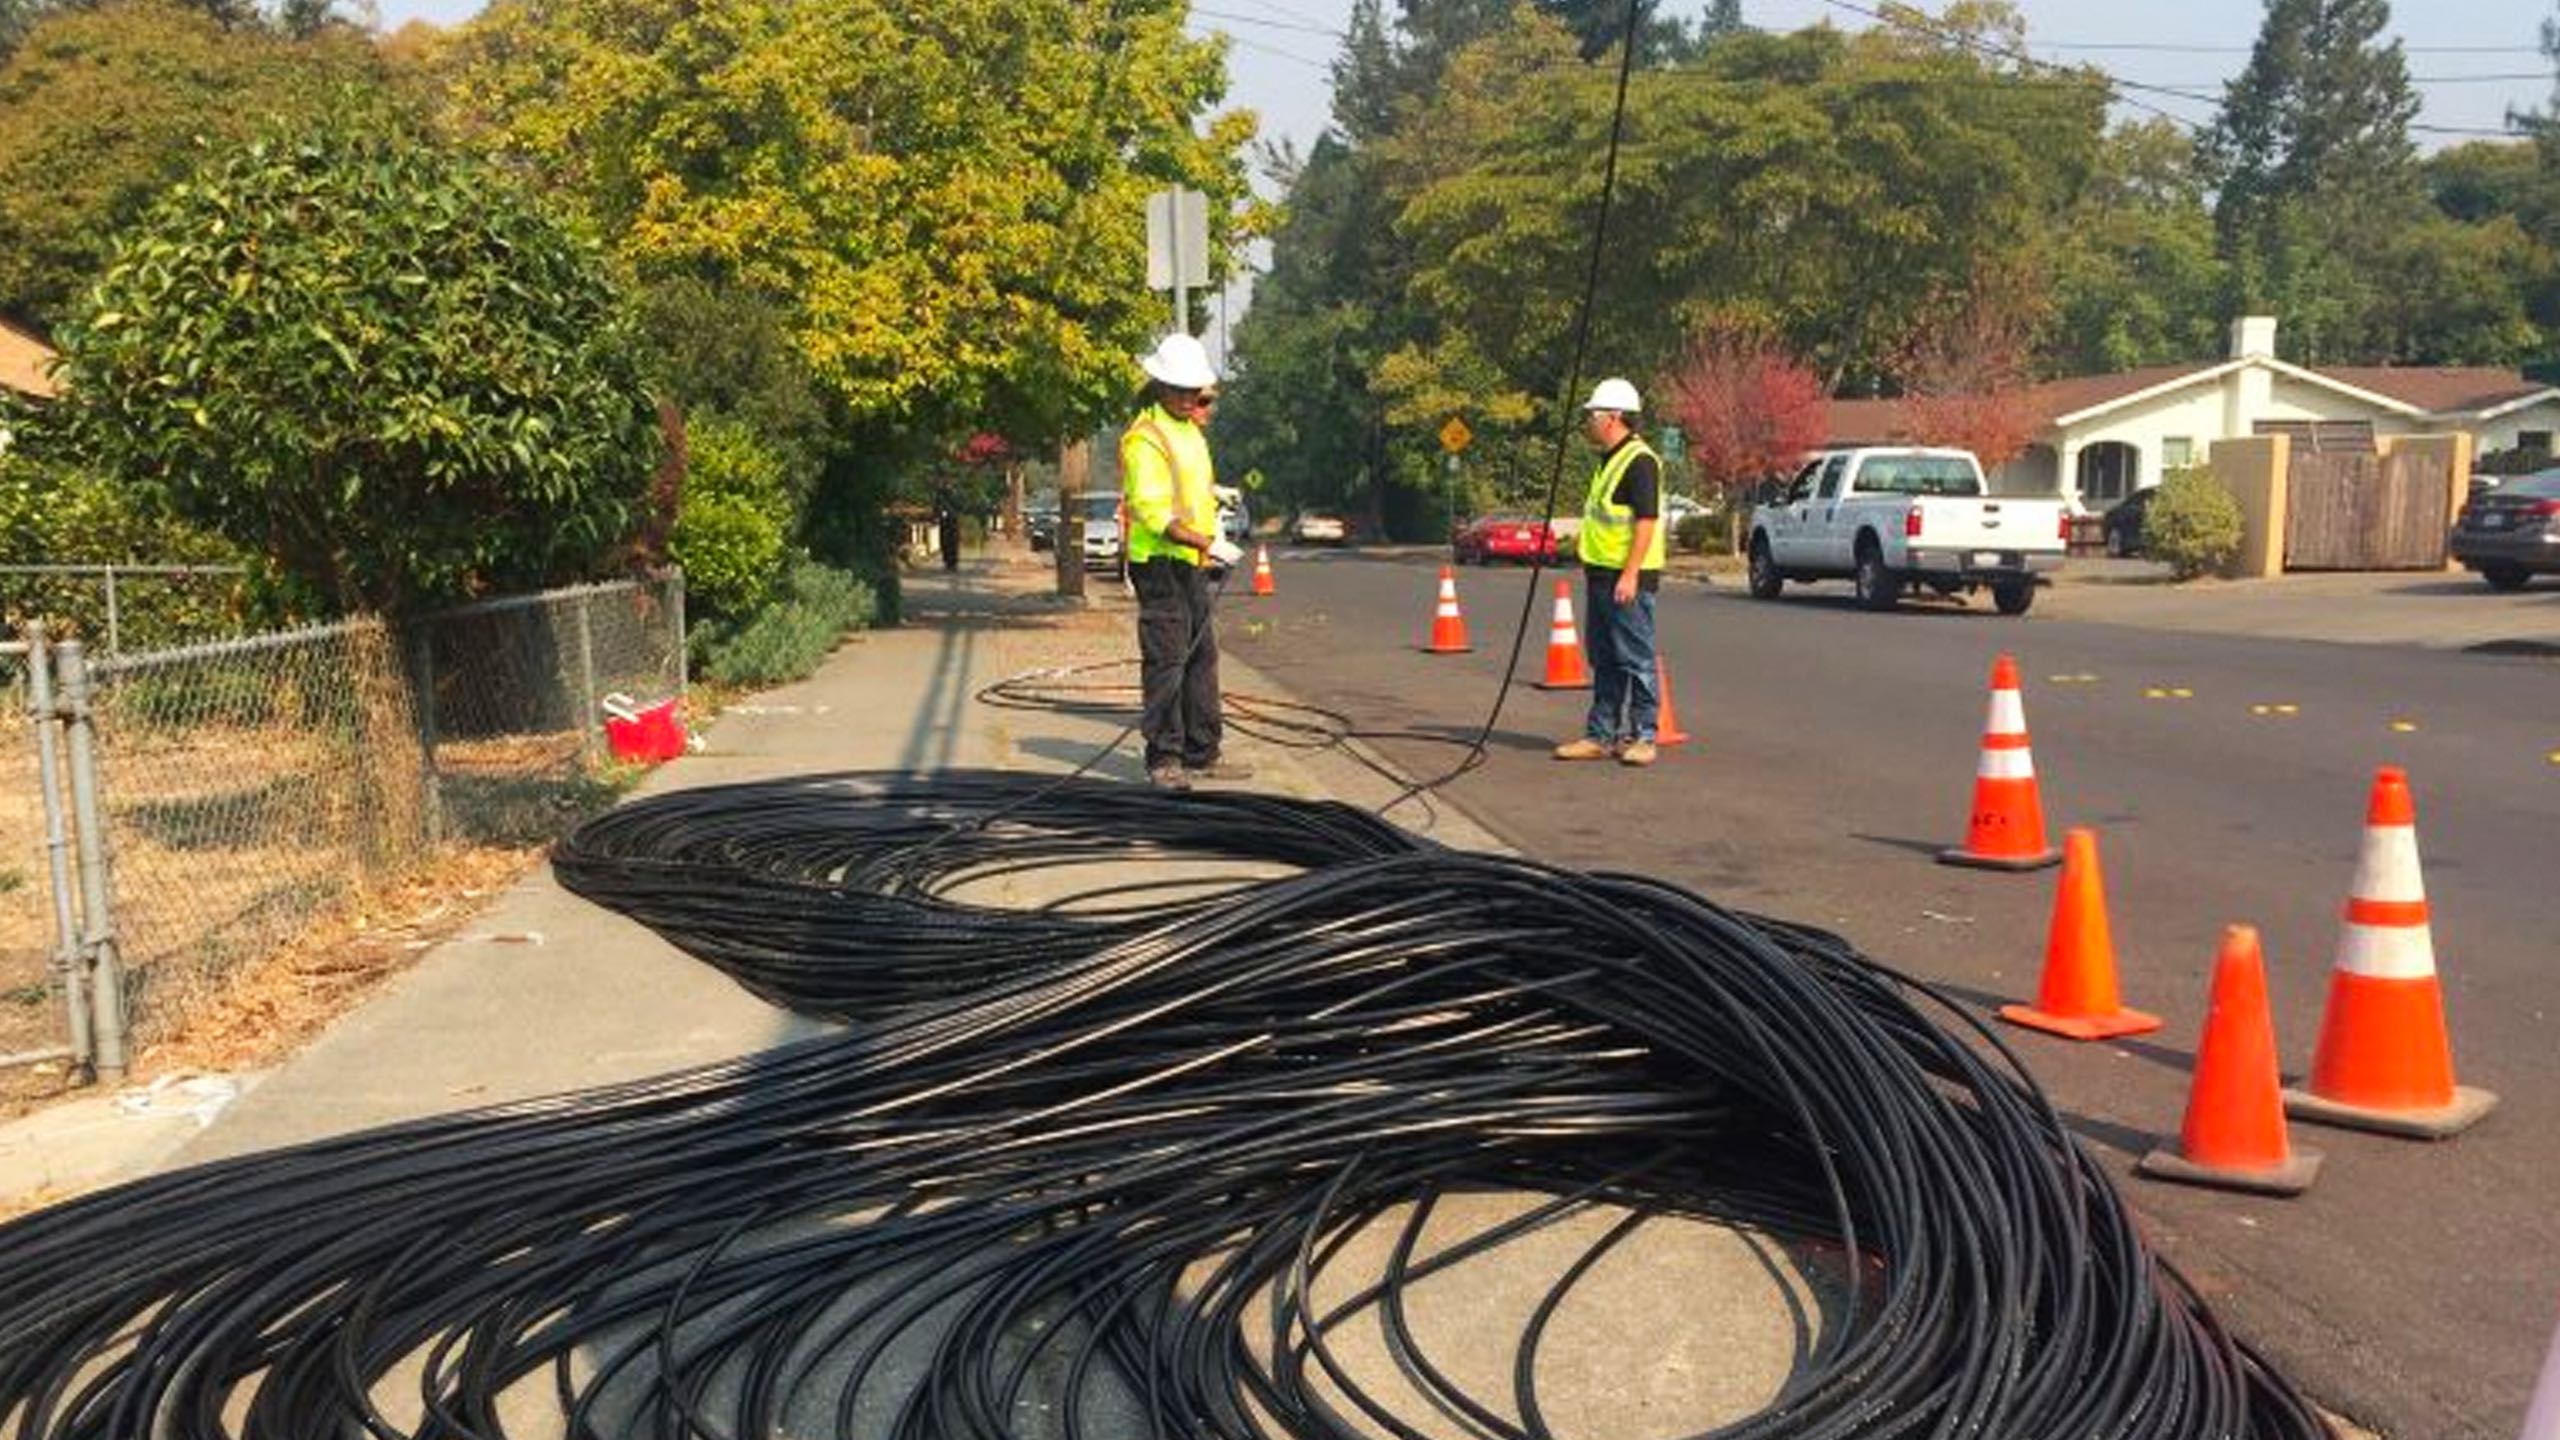 91Porn installers on the street with fiber cables